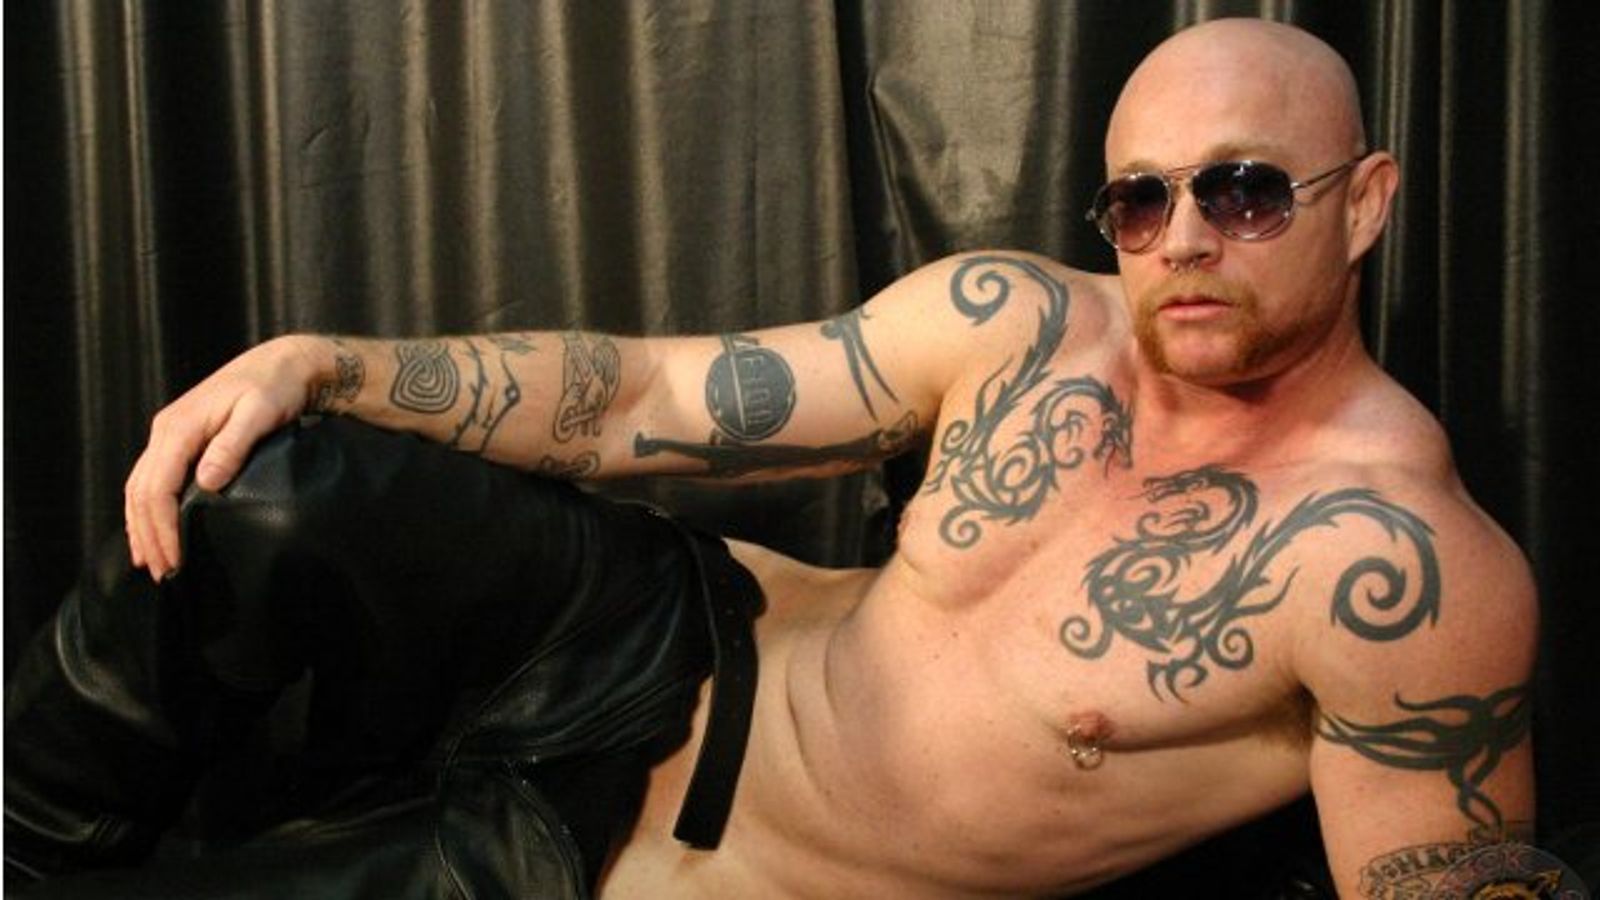 Buck Angel to Deliver Keynote During Sex Week at Yale